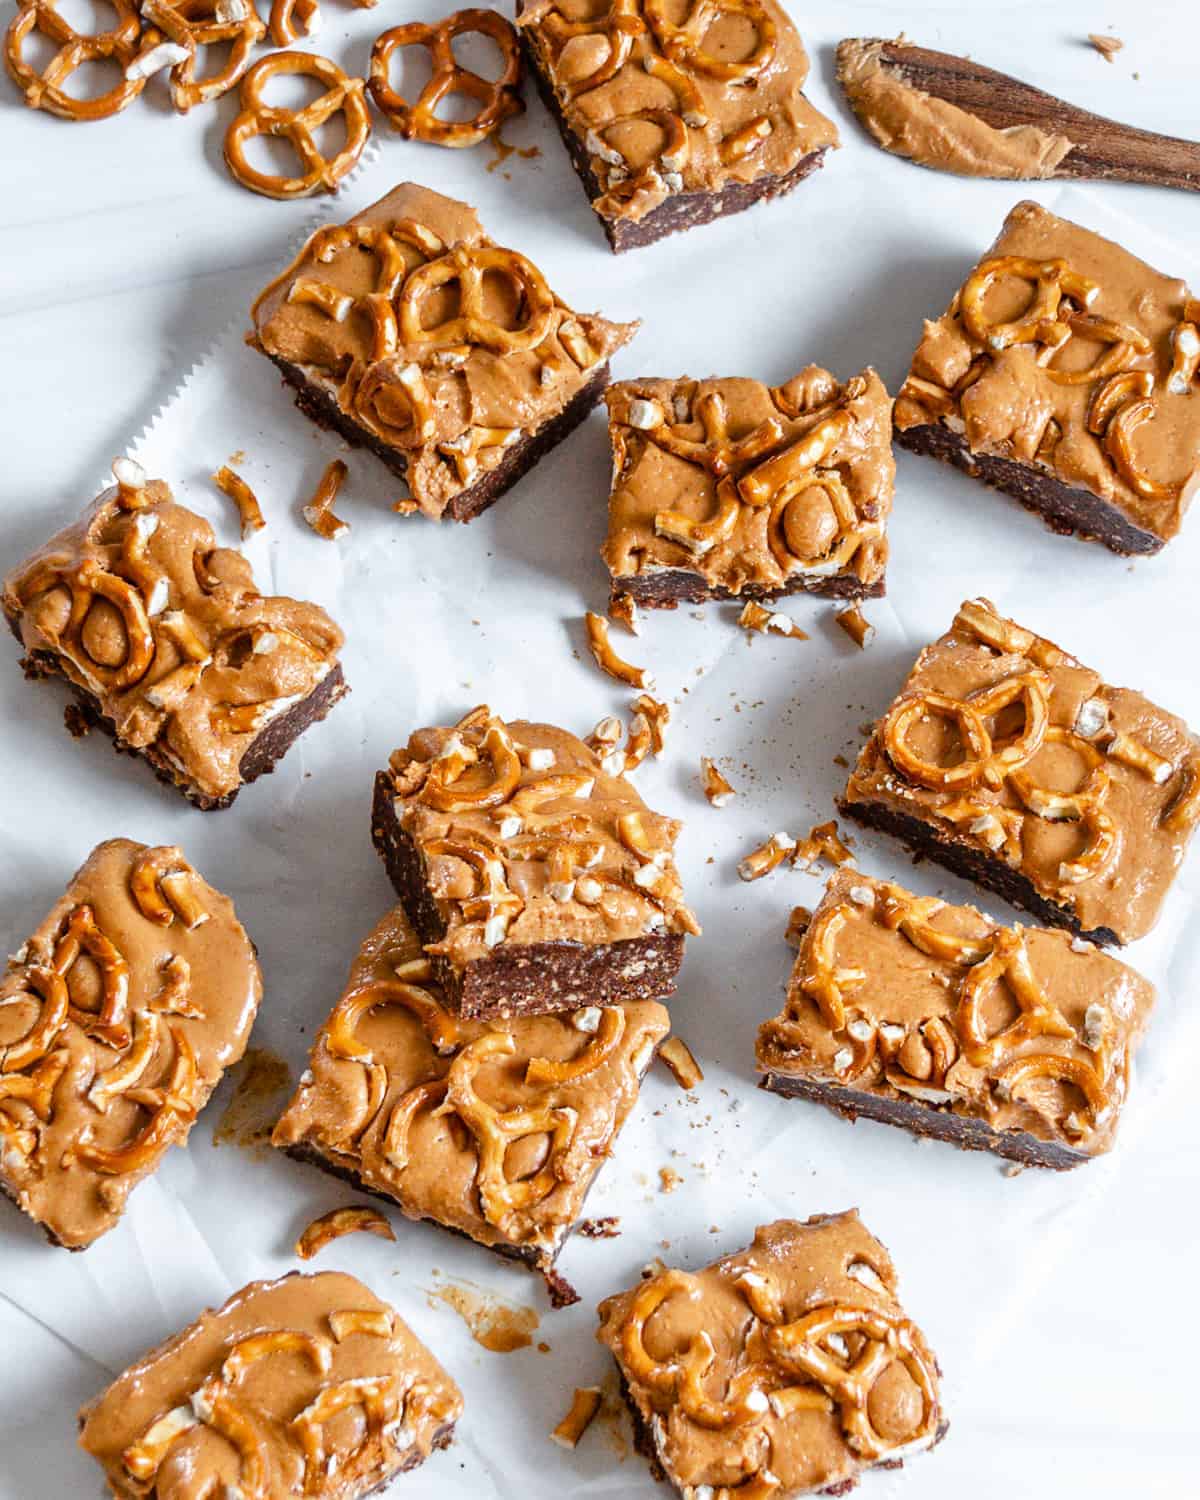 several finished Easy Chocolate Peanut Butter Pretzel Bars cut up into bite size squares against a white background